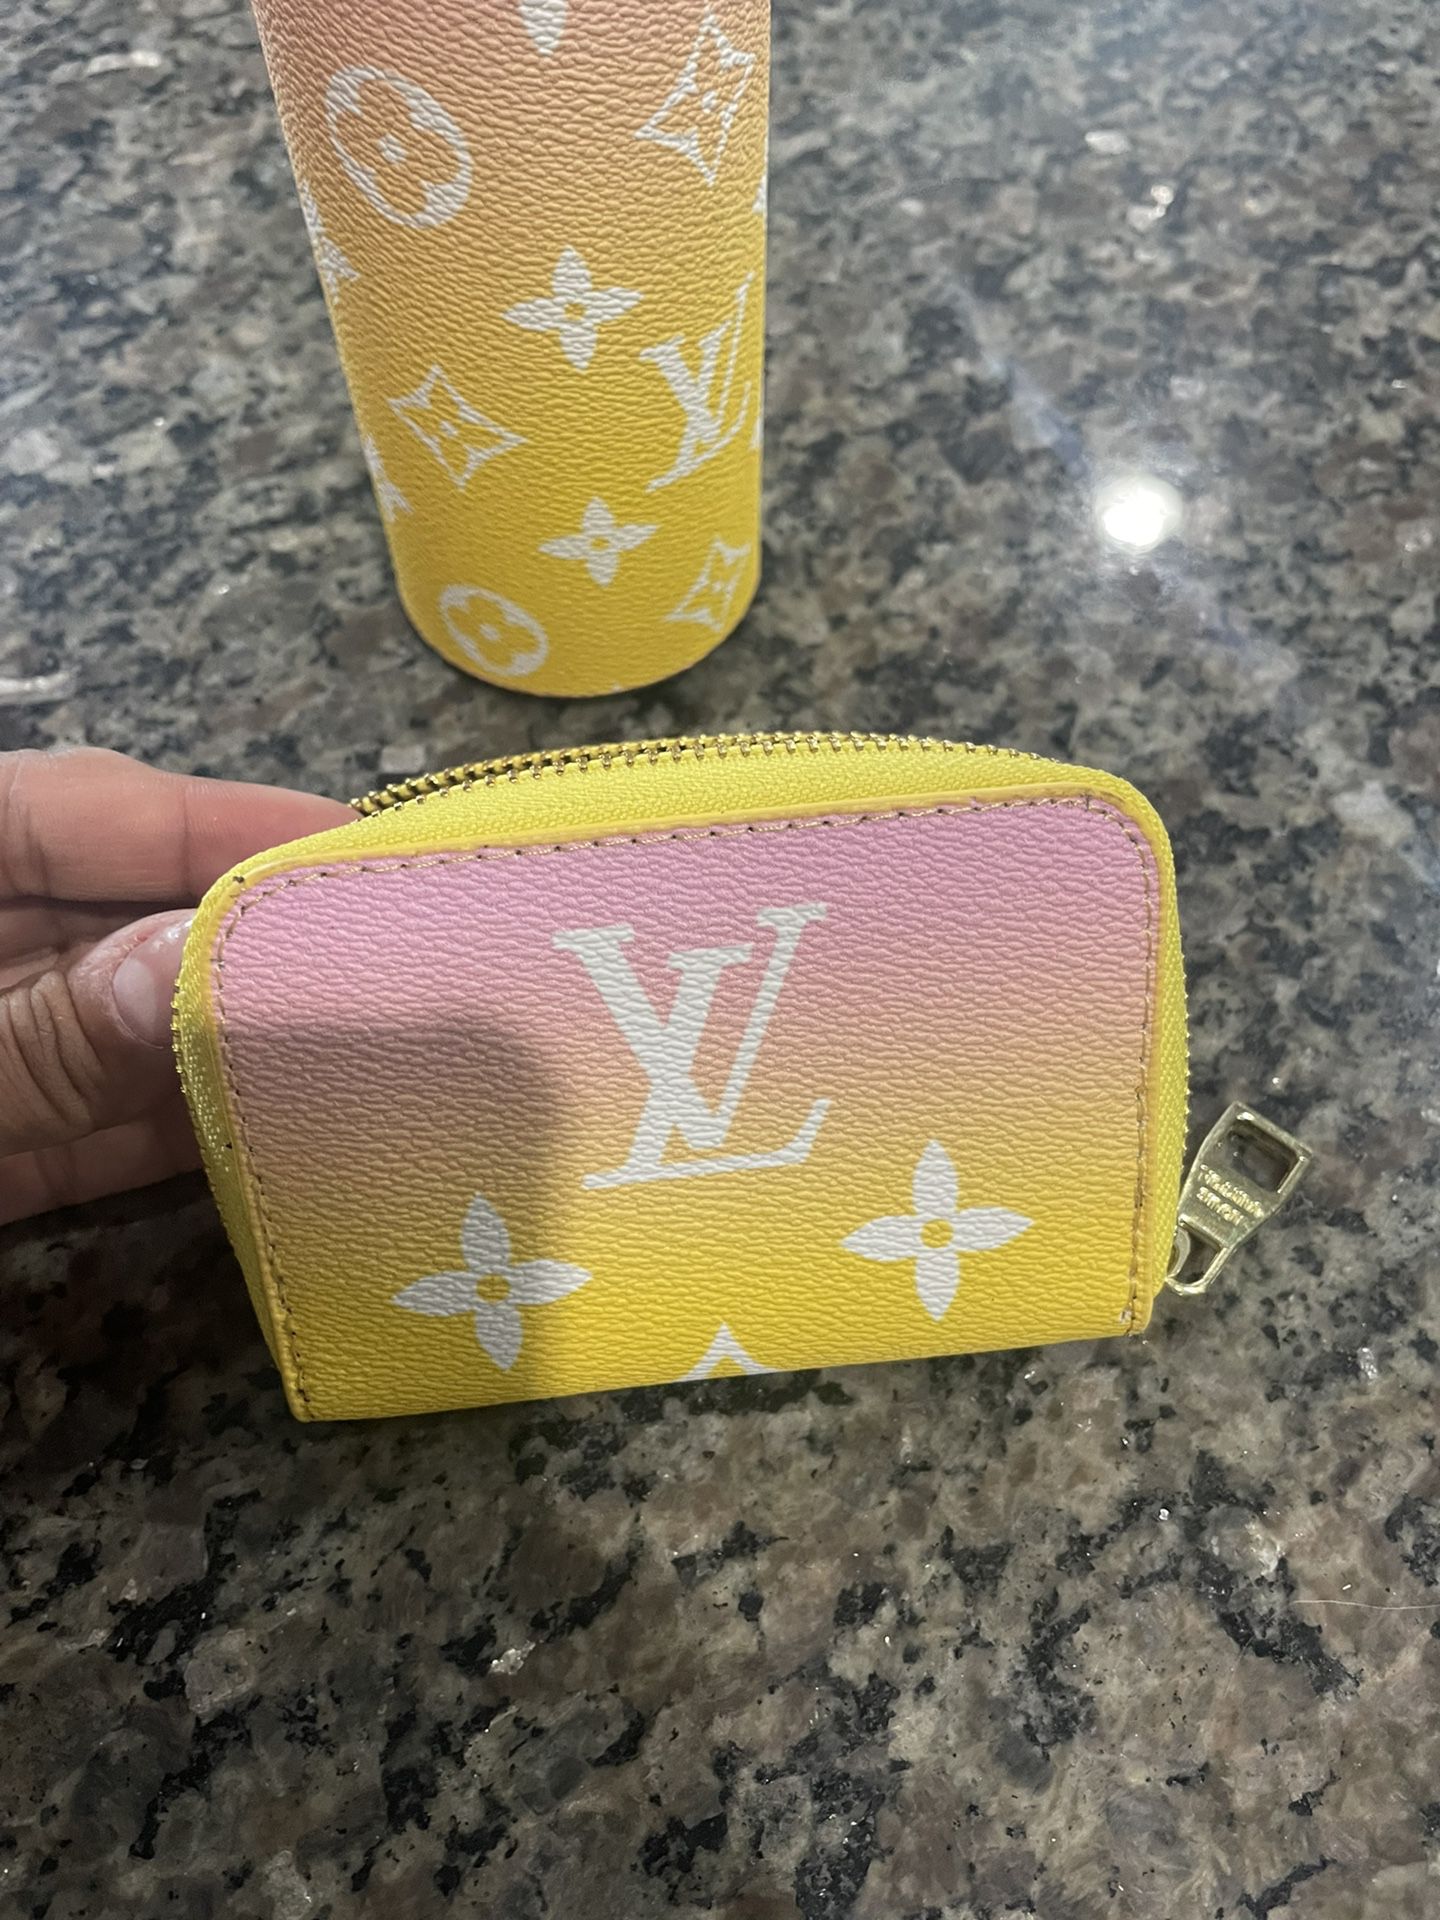 LOUIS VUITTON - キラキラ ピアス /ボディピアス 軟膏 の通販 by coco